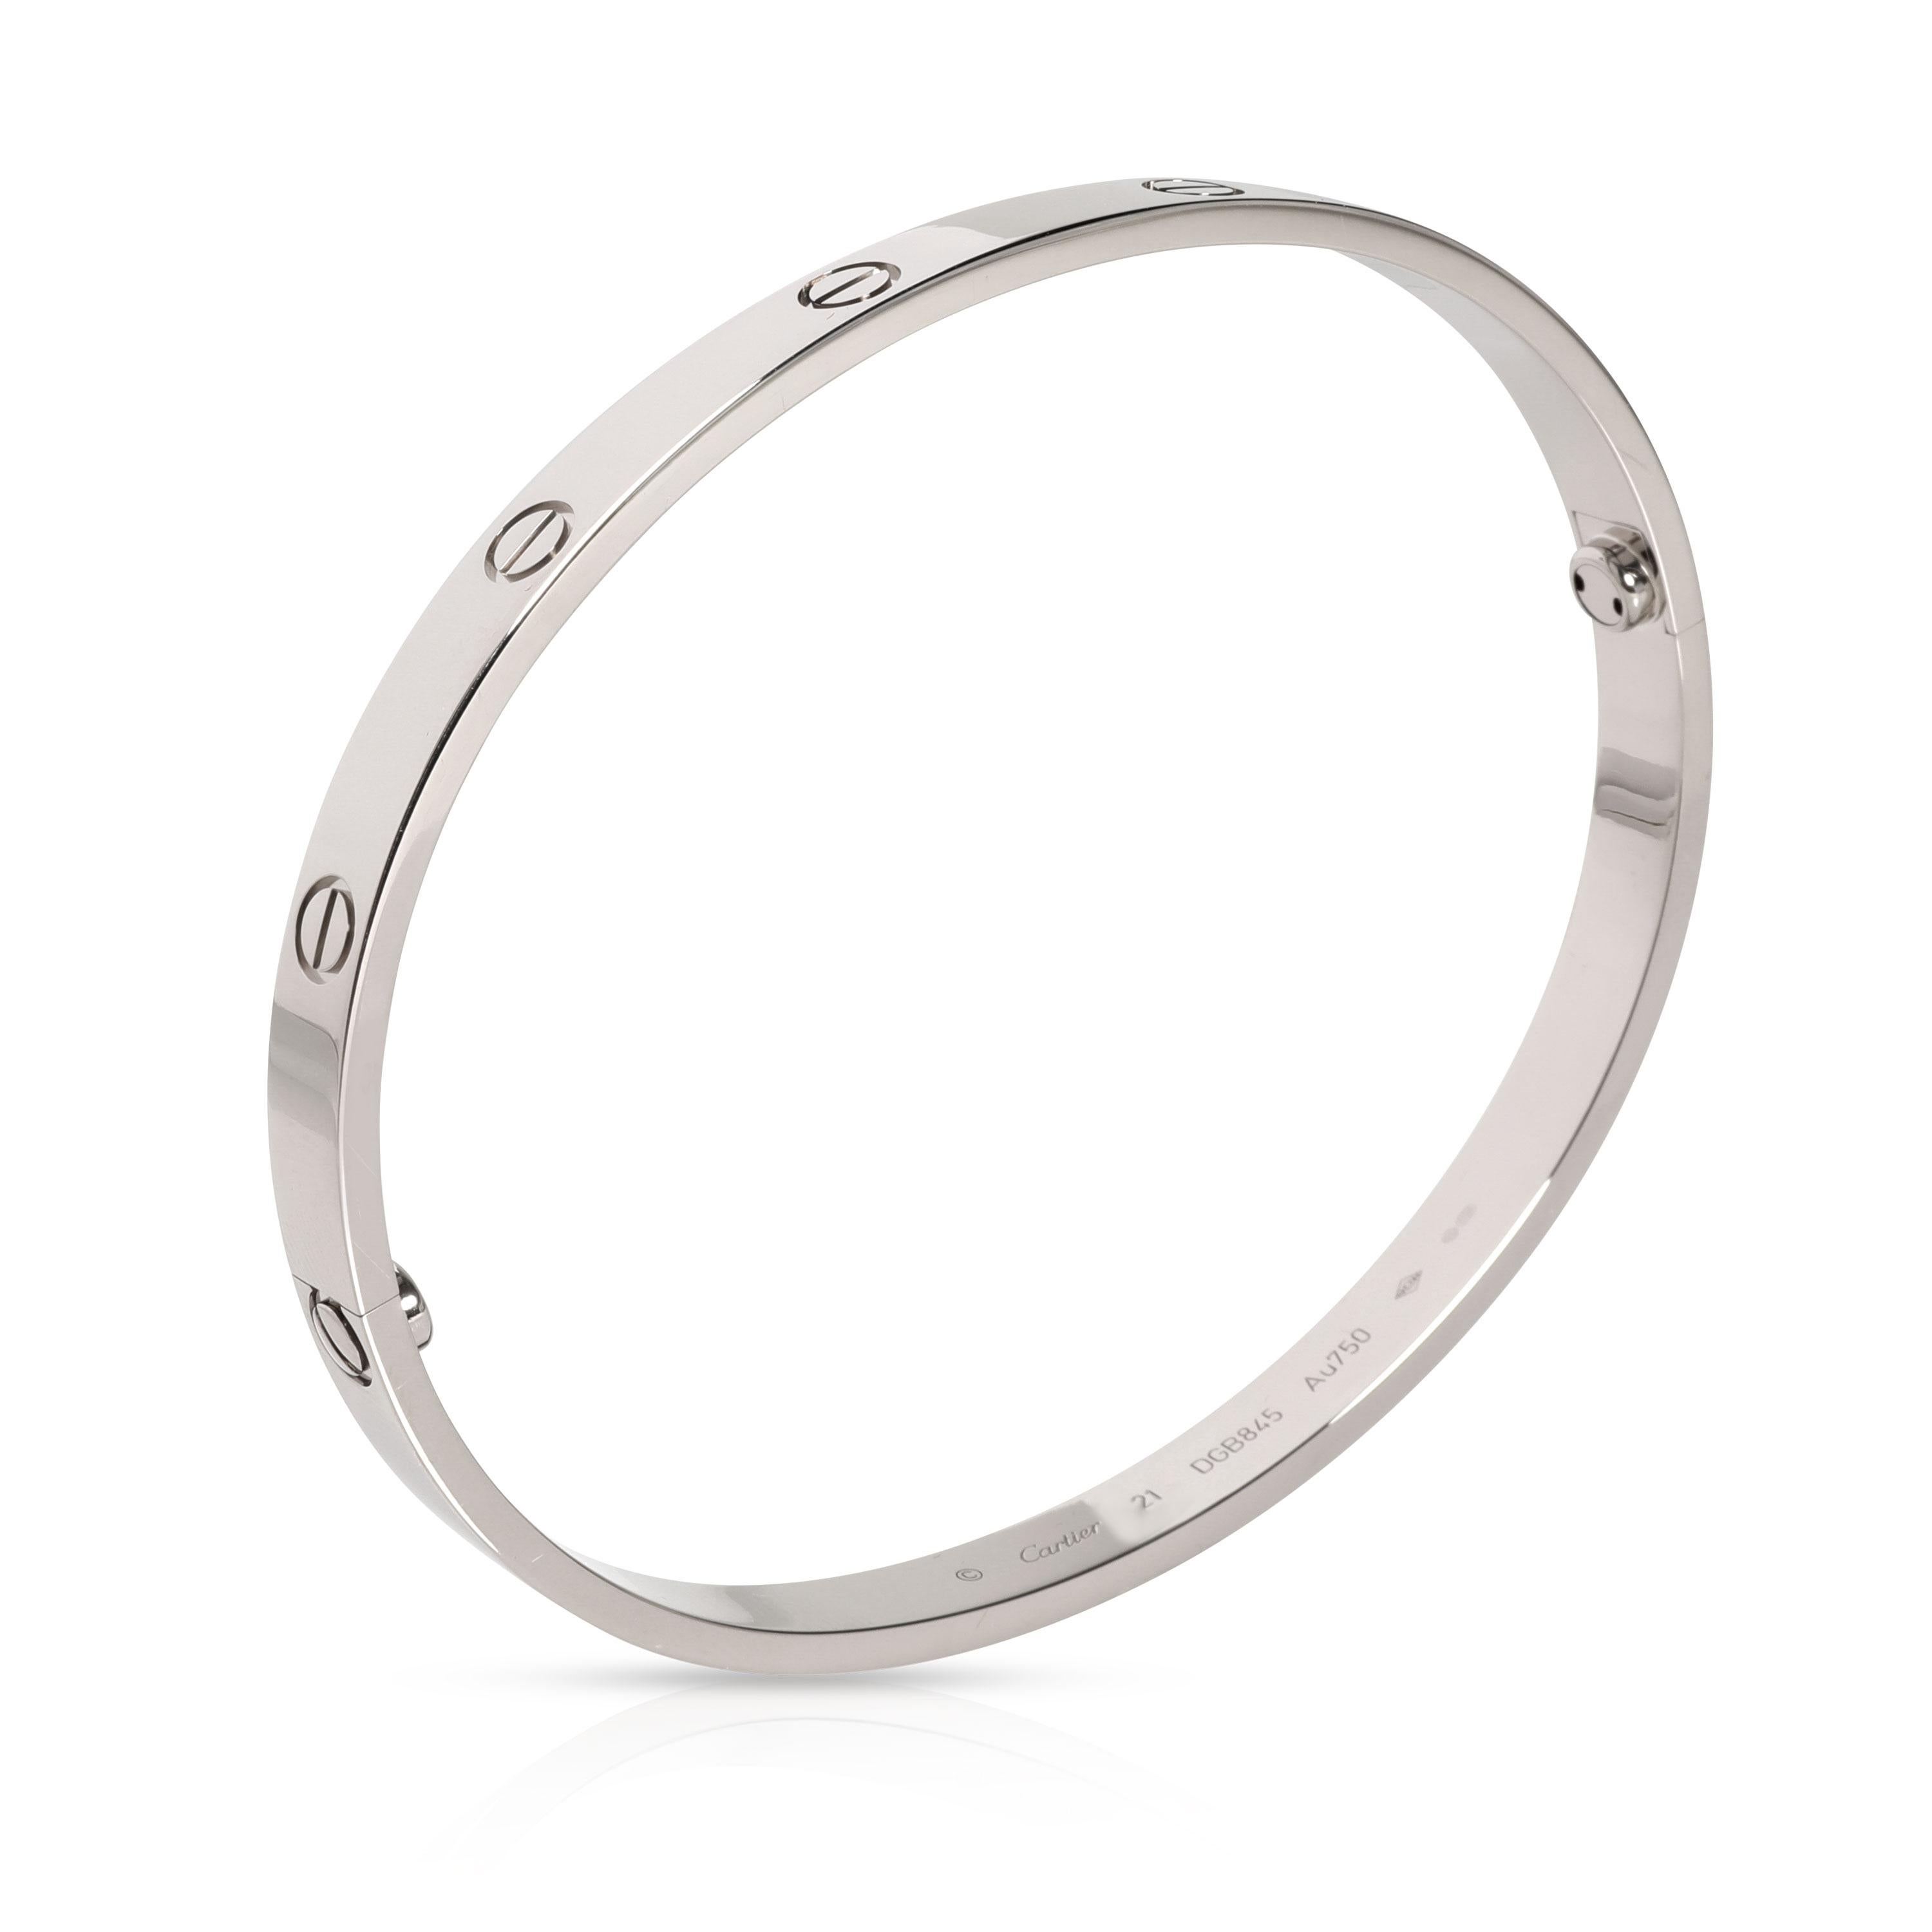 
Cartier Love Bracelet in 18K White Gold

PRIMARY DETAILS
SKU: 105635
Listing Title: Cartier Love Bracelet in 18K White Gold
Condition Description: Retails for 6,750 USD. In excellent condition and recently polished. Cartier Size 21. Comes with the